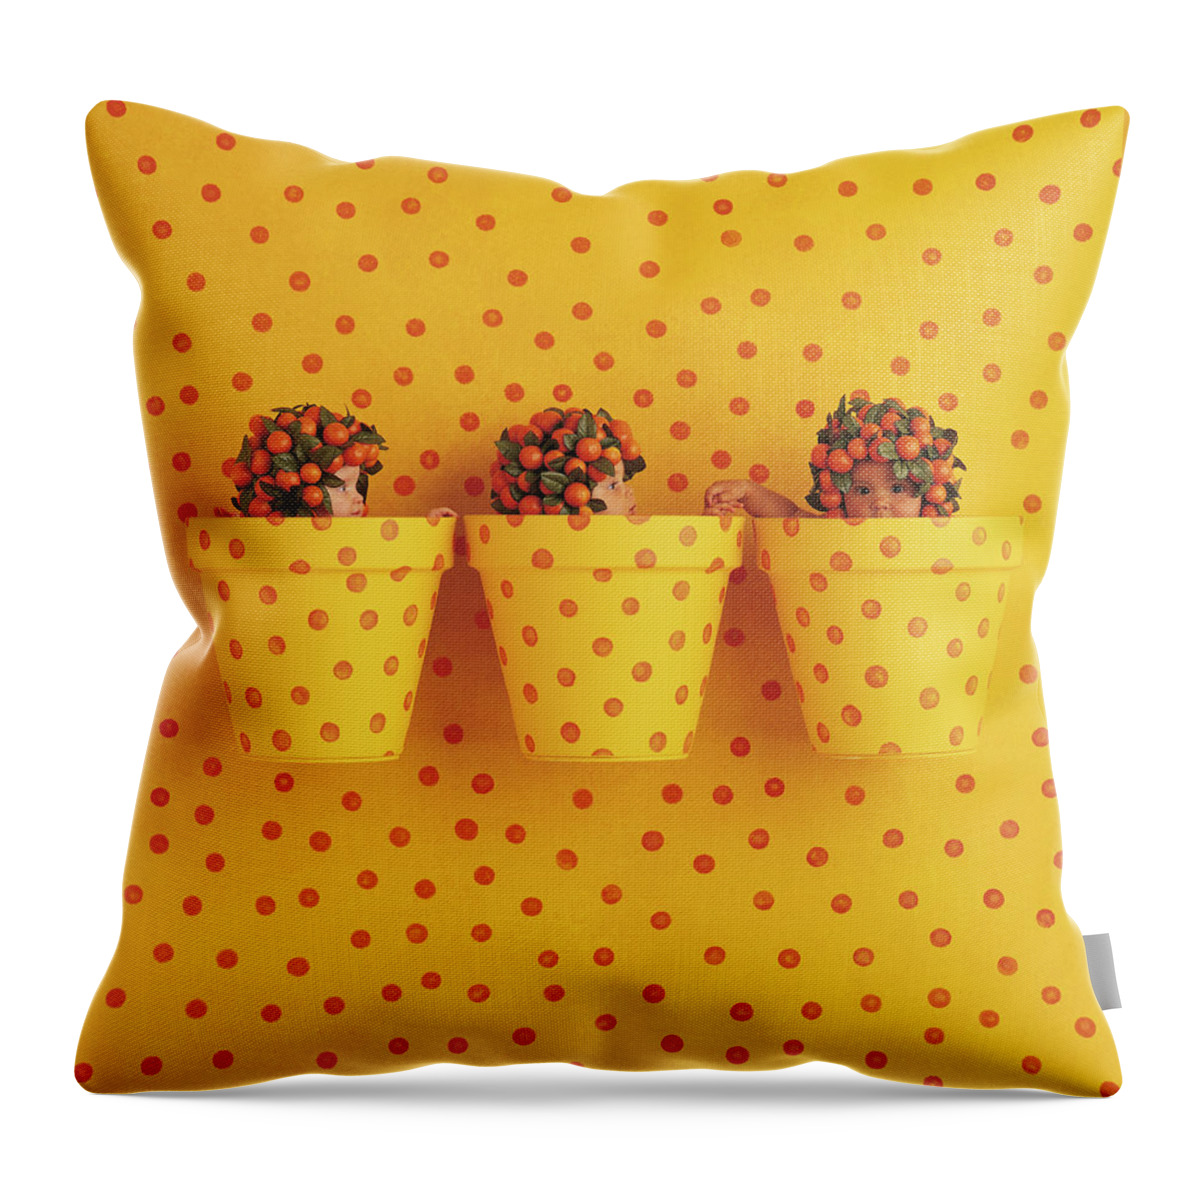 Orange Throw Pillow featuring the photograph Spotted Pots by Anne Geddes